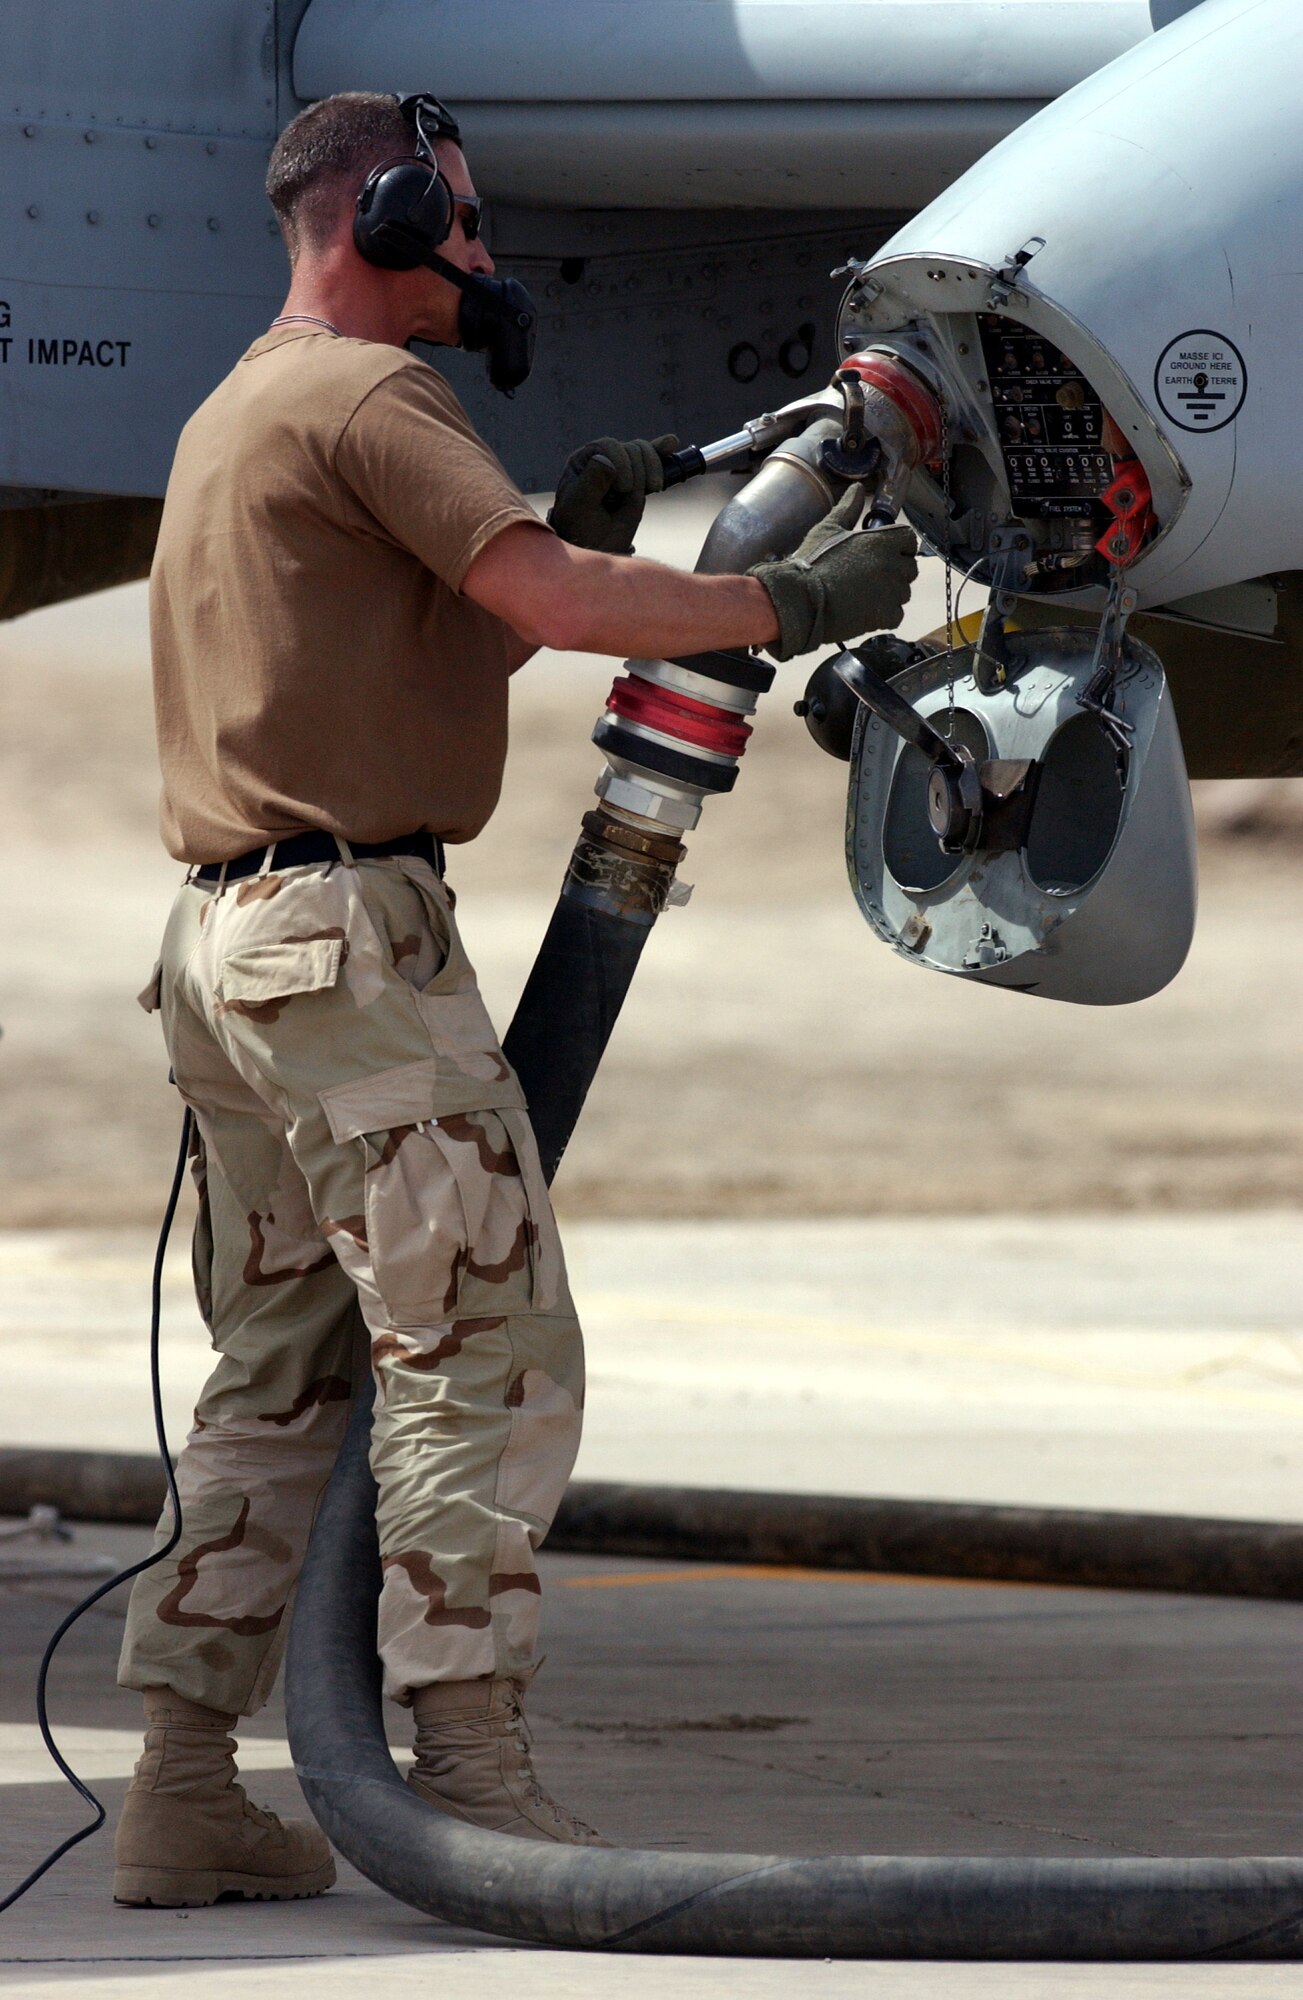 OPERATION IRAQI FREEDOM -- Master Sgt. Kevin Bossaller keeps in voice contact with the pilot as he refuels an A-10 Thunderbolt II. This was the first A-10 "hot" refuel in Iraq and the first time the R-14 fuel hydrant system was used in the hot-refuel process.  Bossaller is an A-10 crew chief with the 442nd Fighter Wing from Whiteman Air Force Base, Mo., which was deployed to Tallil and Kirkuk Air Bases in Iraq in 2003.  Air Force Reservists who were on this deployment were recently awarded the Air Force Outstanding Unit Award with a Valor Device.  (U.S. Air Force photo by Master Sgt. Terry L. Blevins)